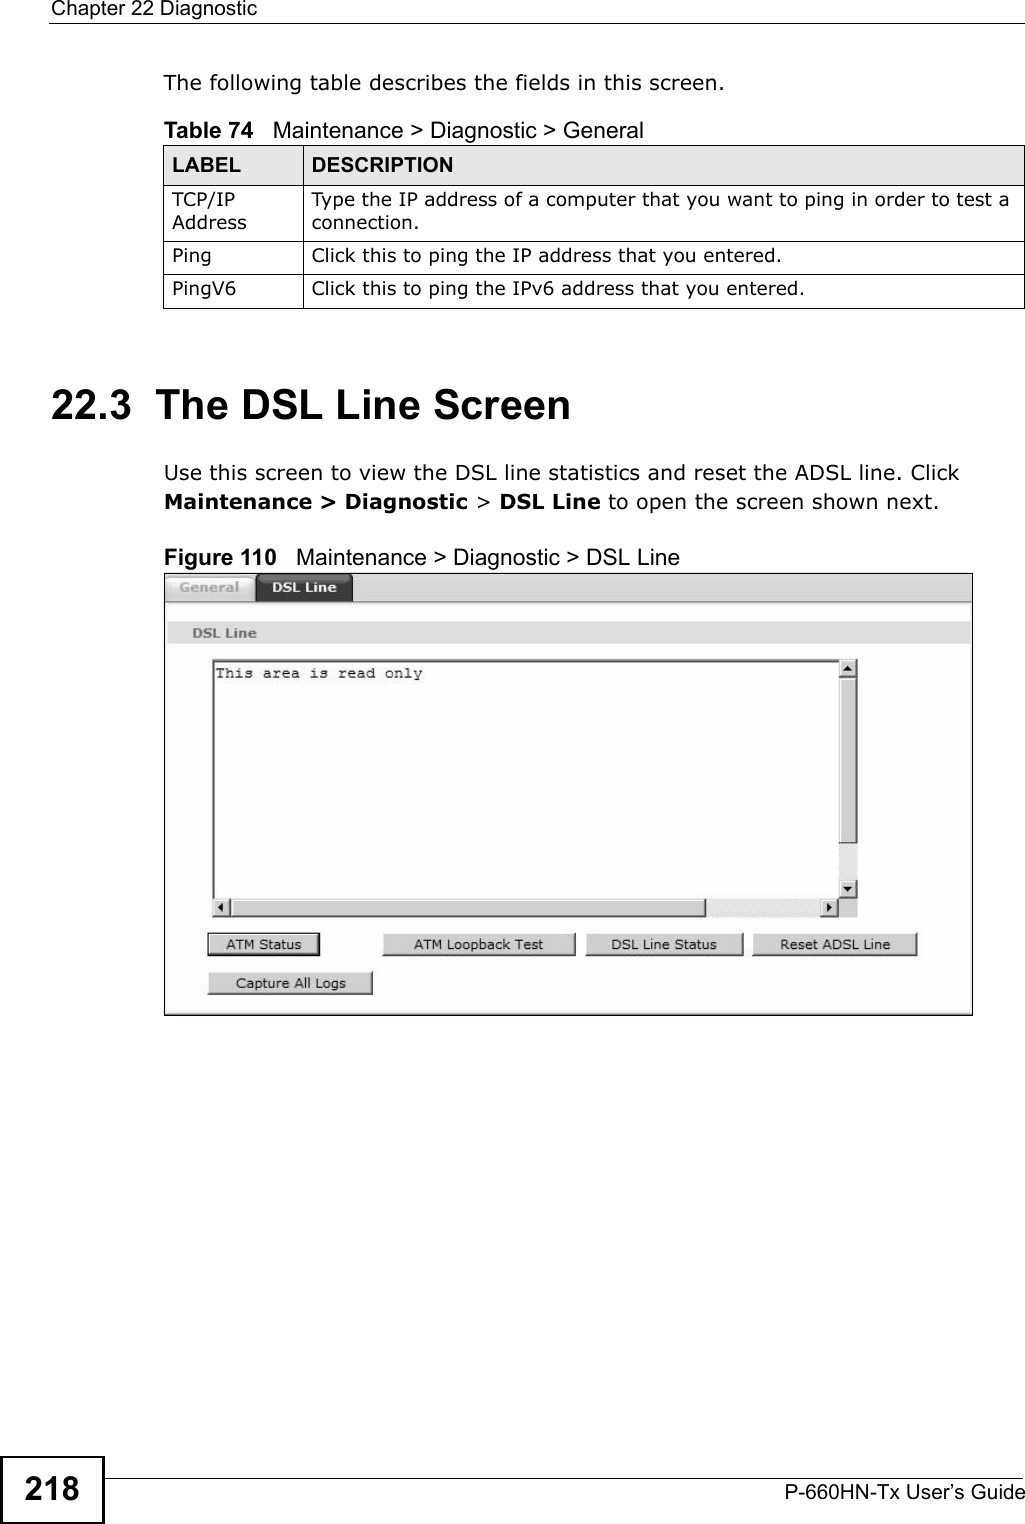 Chapter 22 DiagnosticP-660HN-Tx User’s Guide218The following table describes the fields in this screen. 22.3  The DSL Line Screen Use this screen to view the DSL line statistics and reset the ADSL line. Click Maintenance &gt; Diagnostic &gt; DSL Line to open the screen shown next.Figure 110   Maintenance &gt; Diagnostic &gt; DSL LineTable 74   Maintenance &gt; Diagnostic &gt; GeneralLABEL DESCRIPTIONTCP/IP AddressType the IP address of a computer that you want to ping in order to test a connection.Ping Click this to ping the IP address that you entered.PingV6 Click this to ping the IPv6 address that you entered.